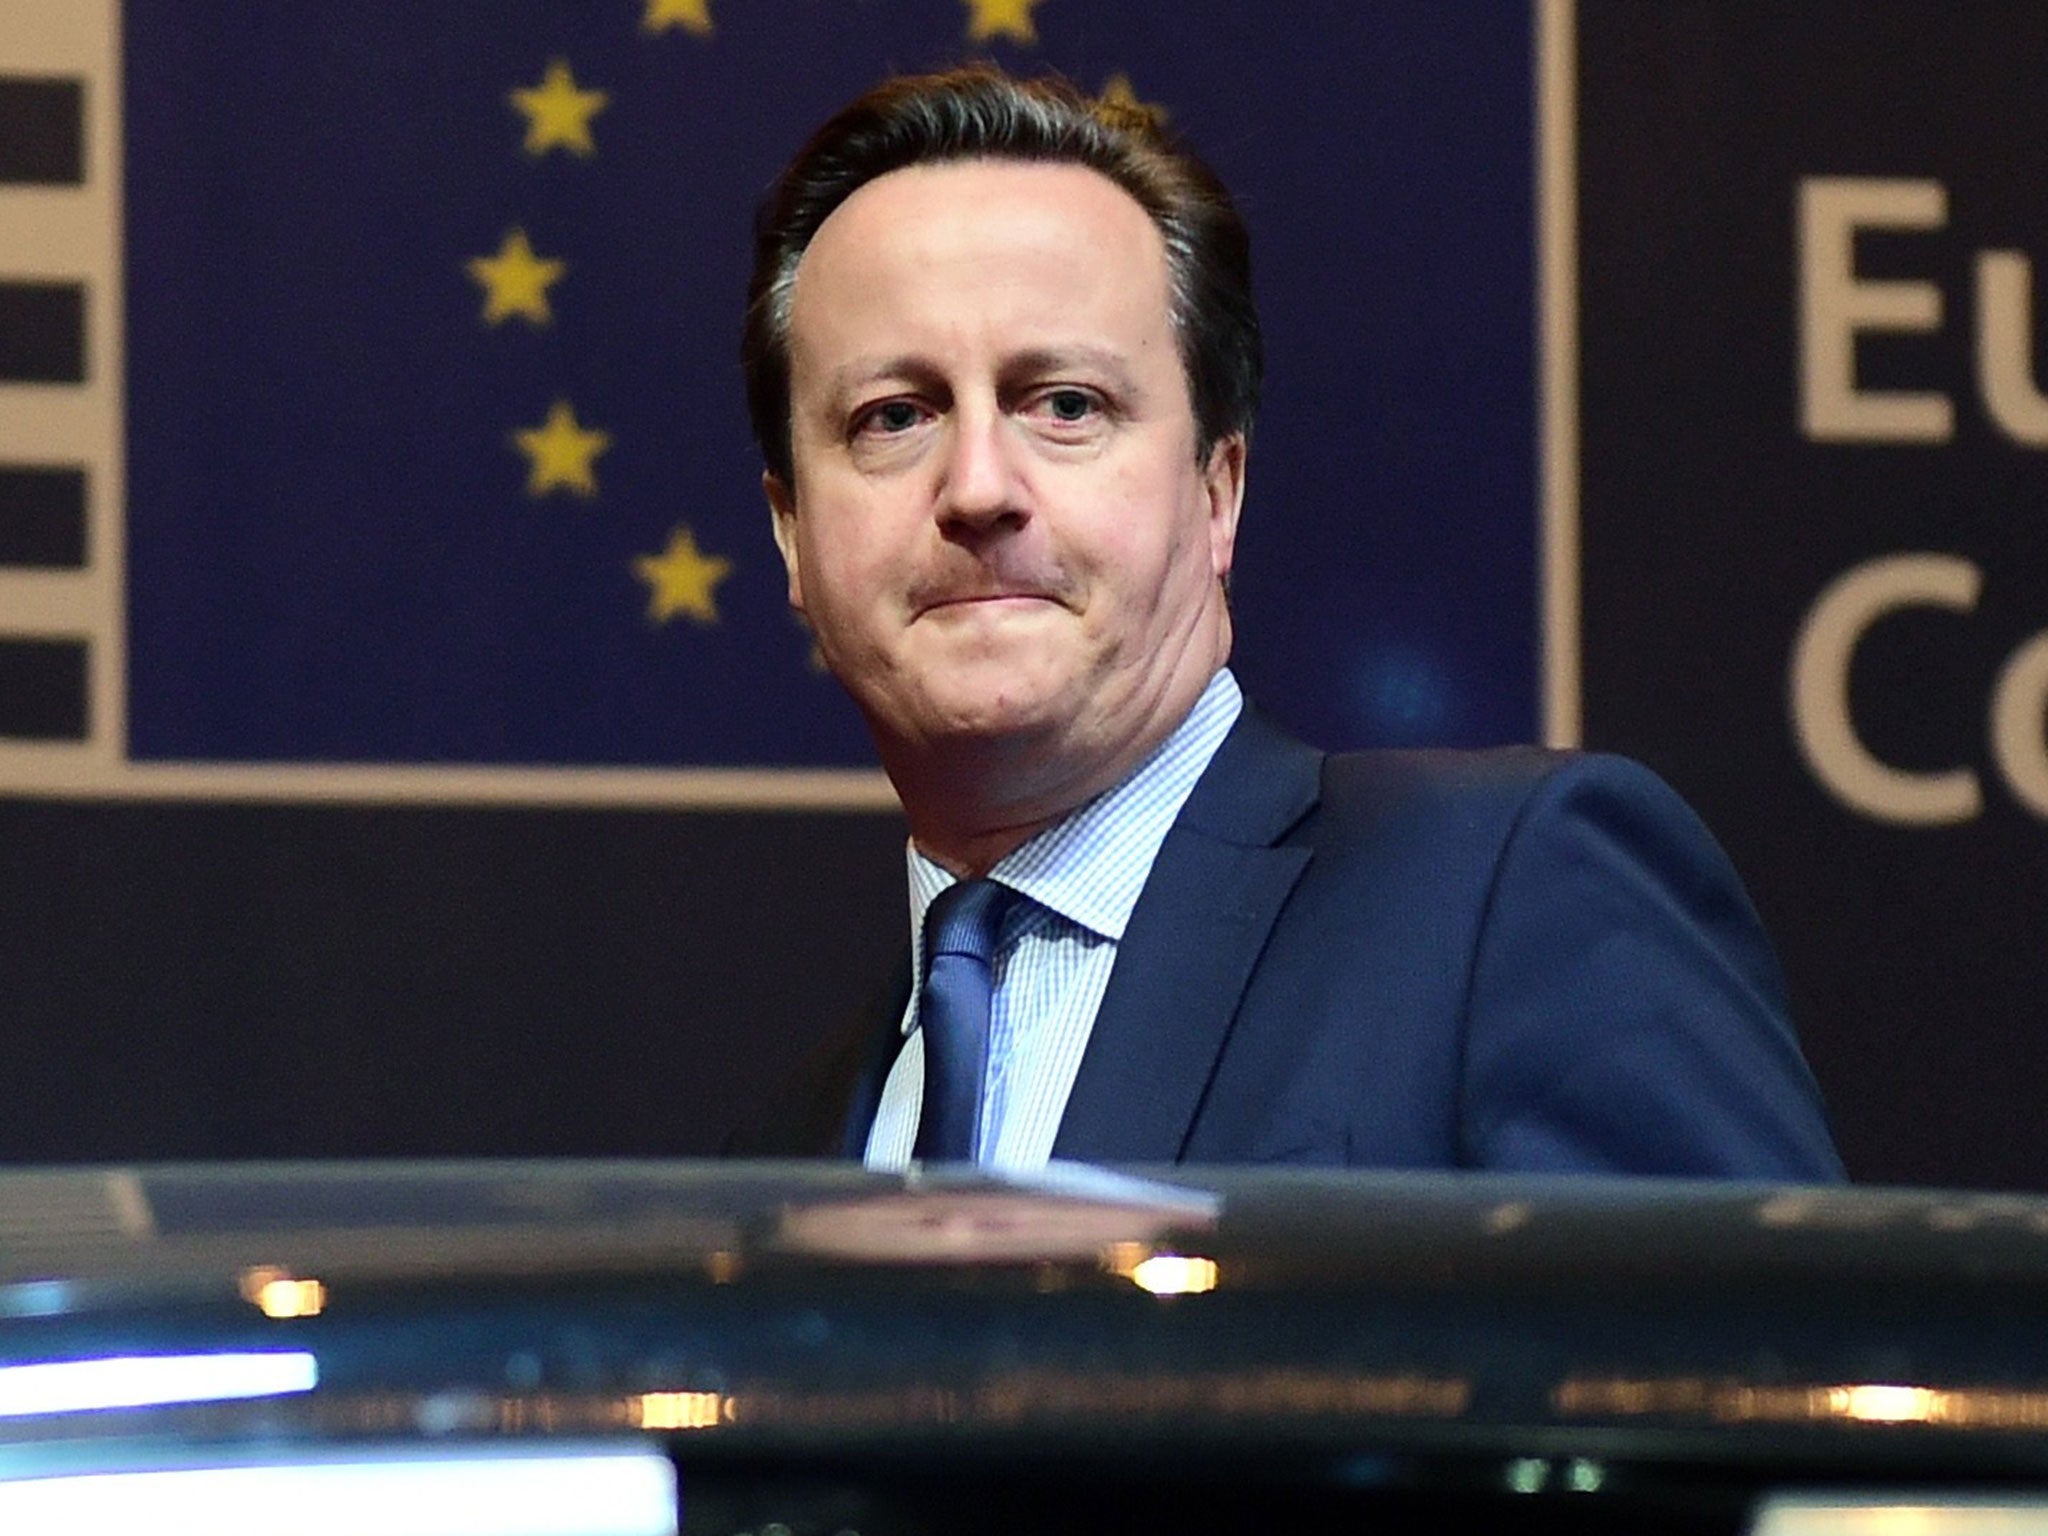 David Cameron leaves the summit at 4:30am after through-the-night talks